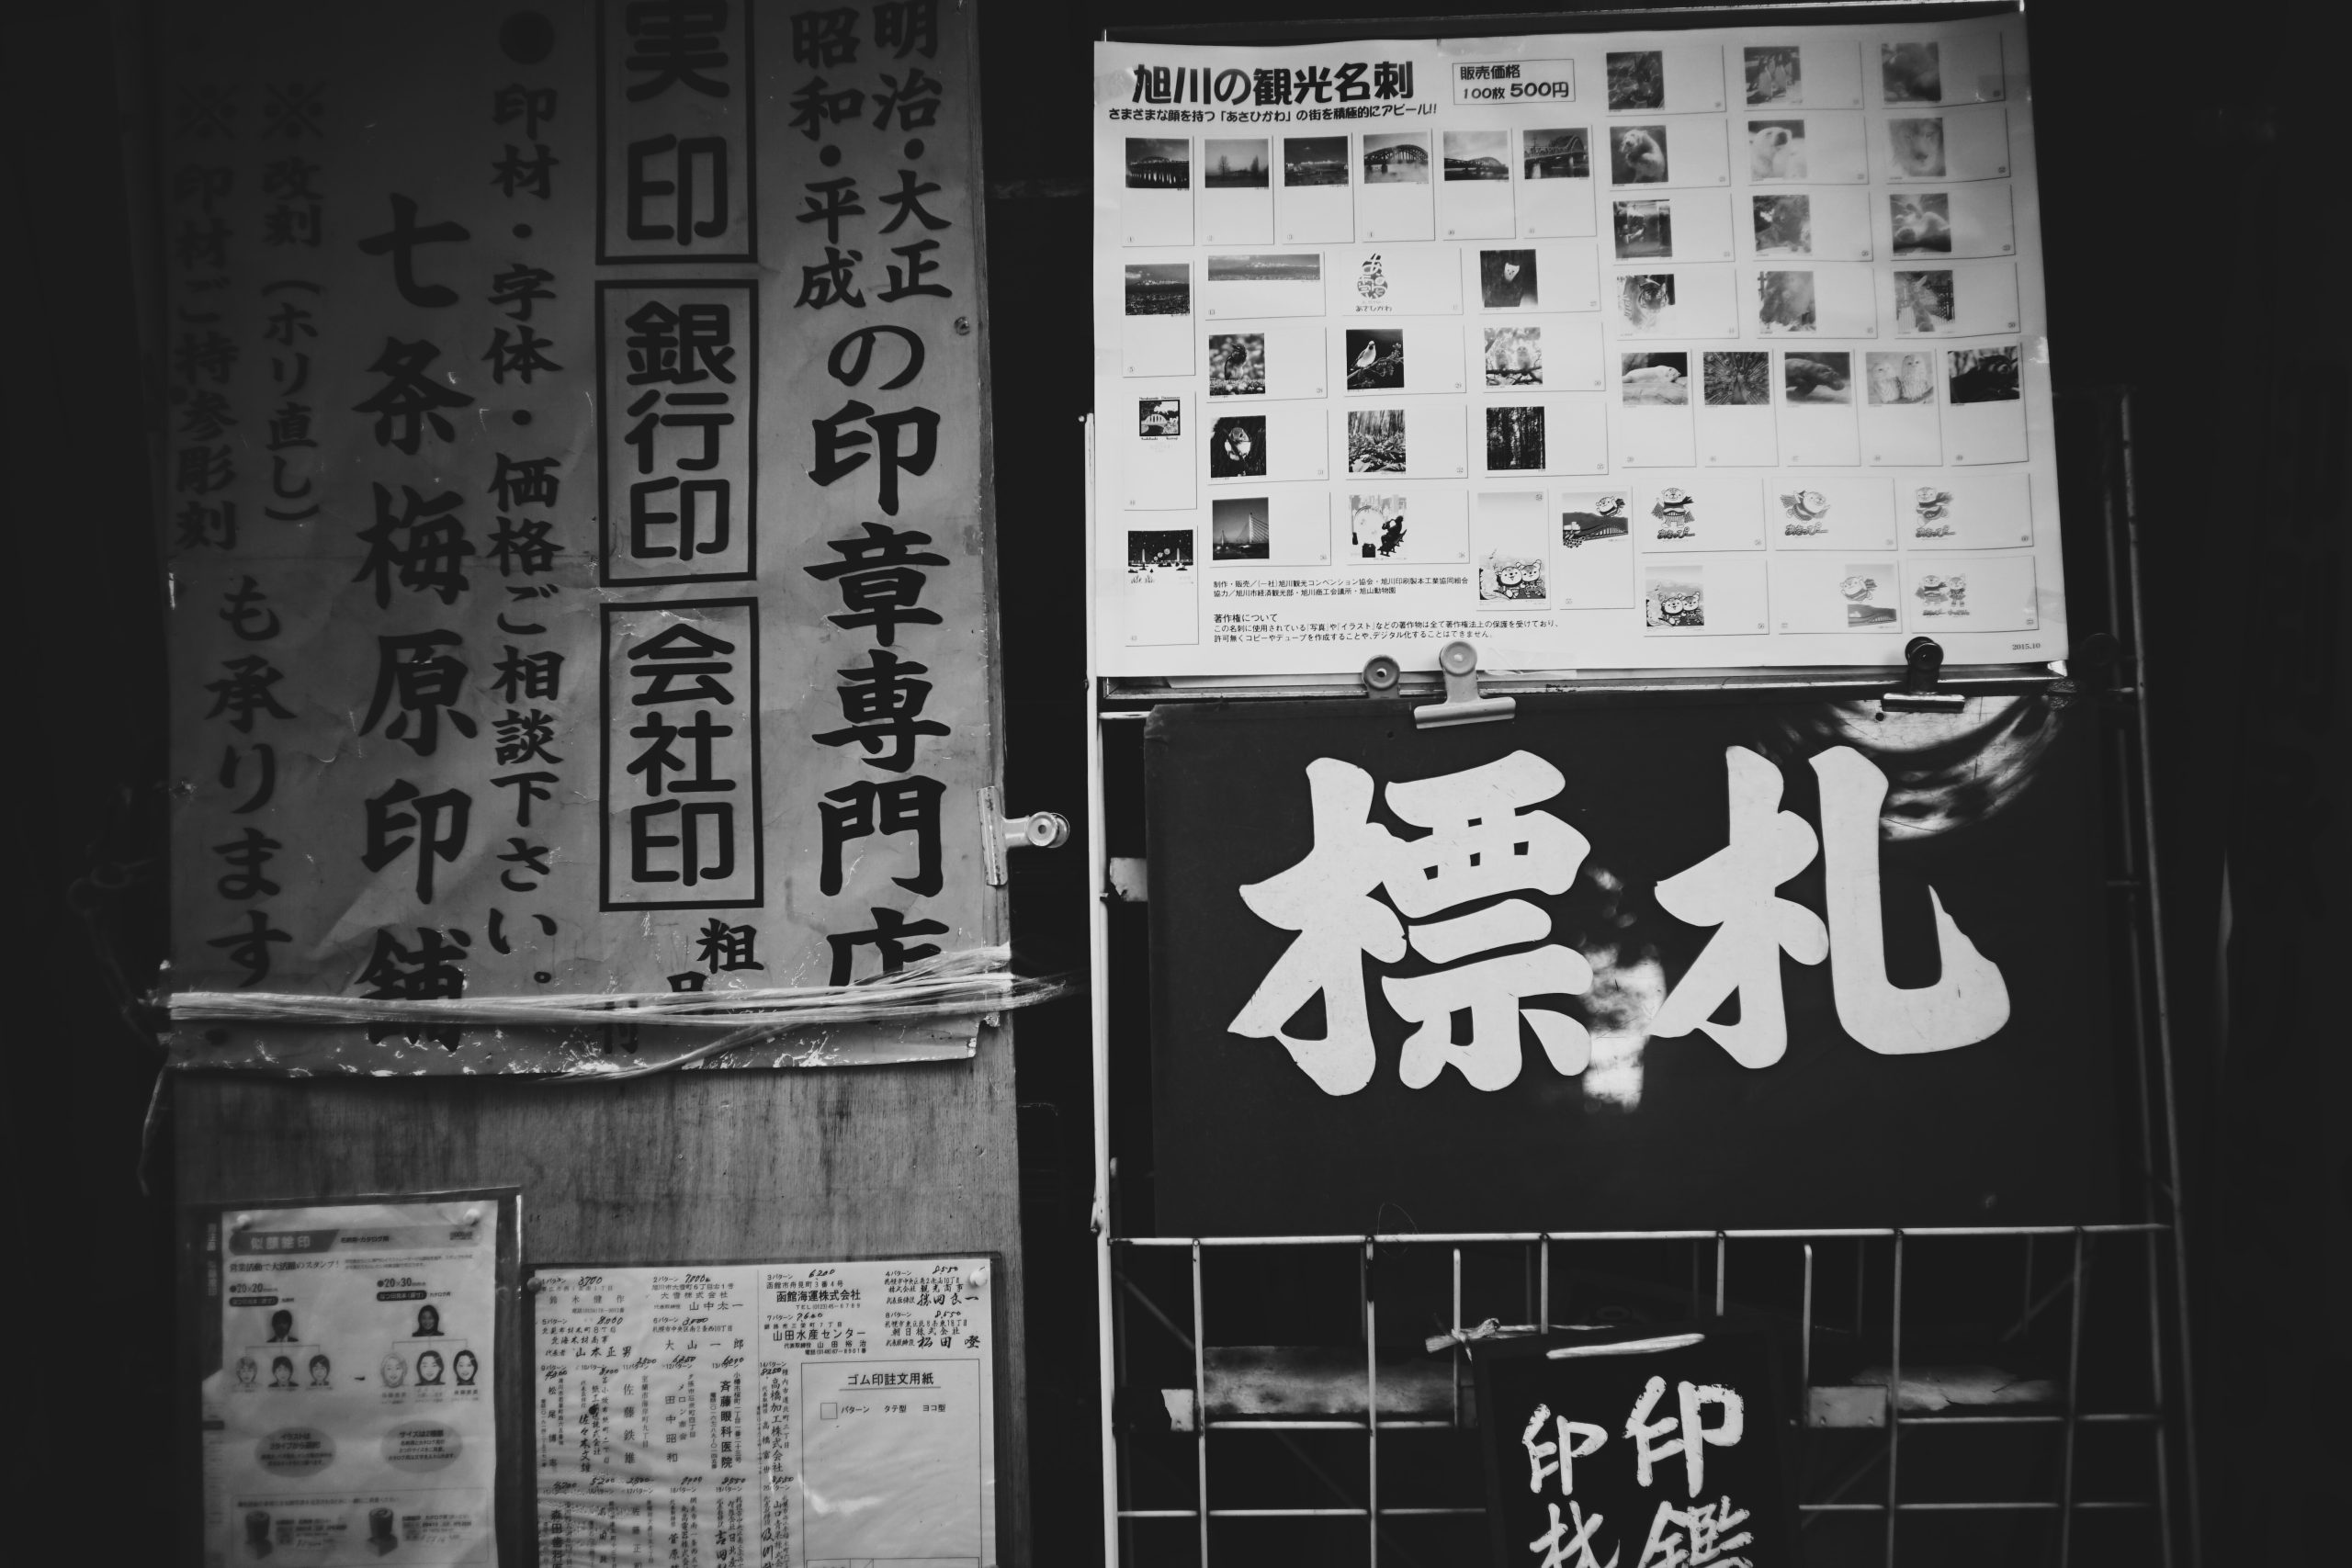 wall with posters in japanese